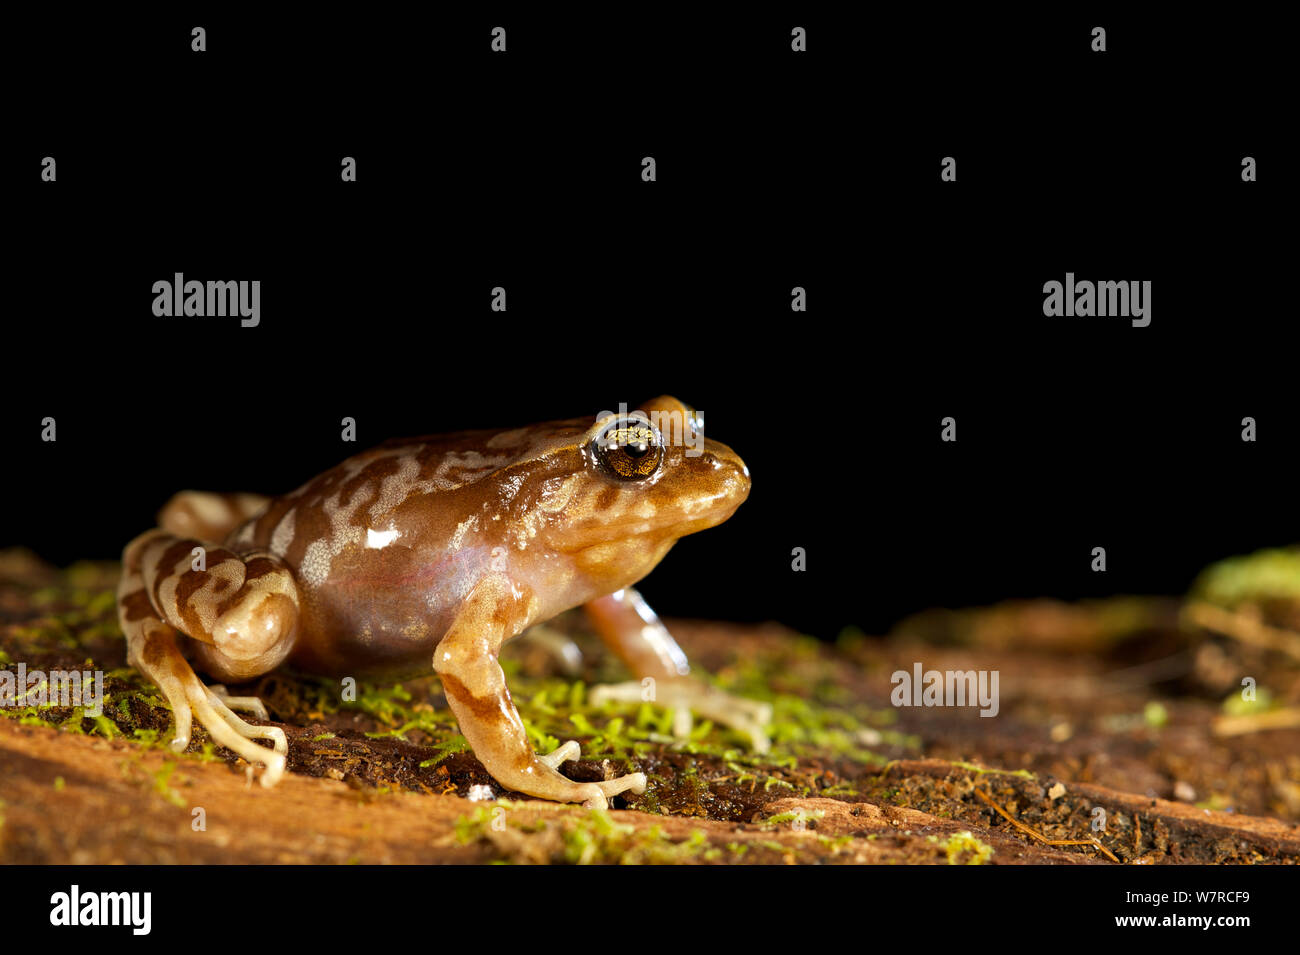 Oncol's Ground Frog (Eupsophus altor) Newly described to science in 2012, Oncol Park,Chile, Stock Photo